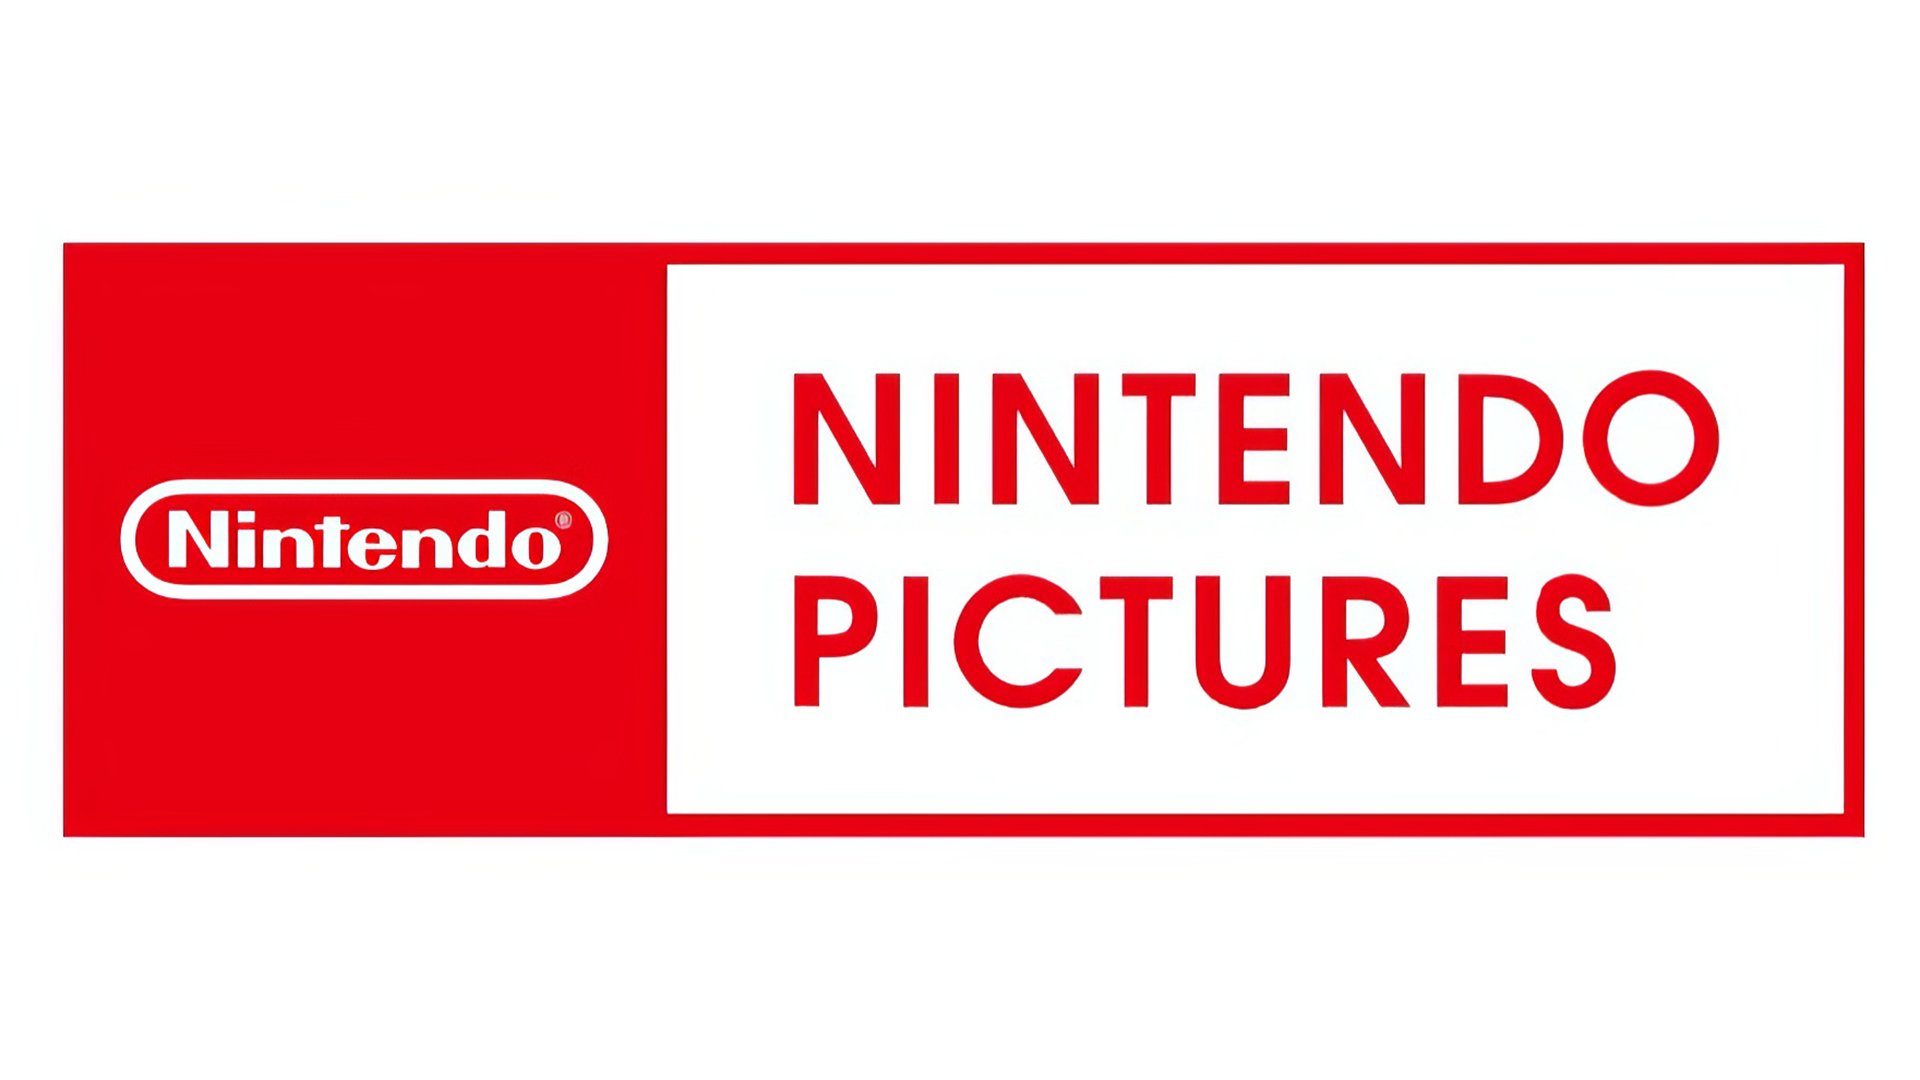 Nintendo has officially launched its new animation studio Nintendo Pictures